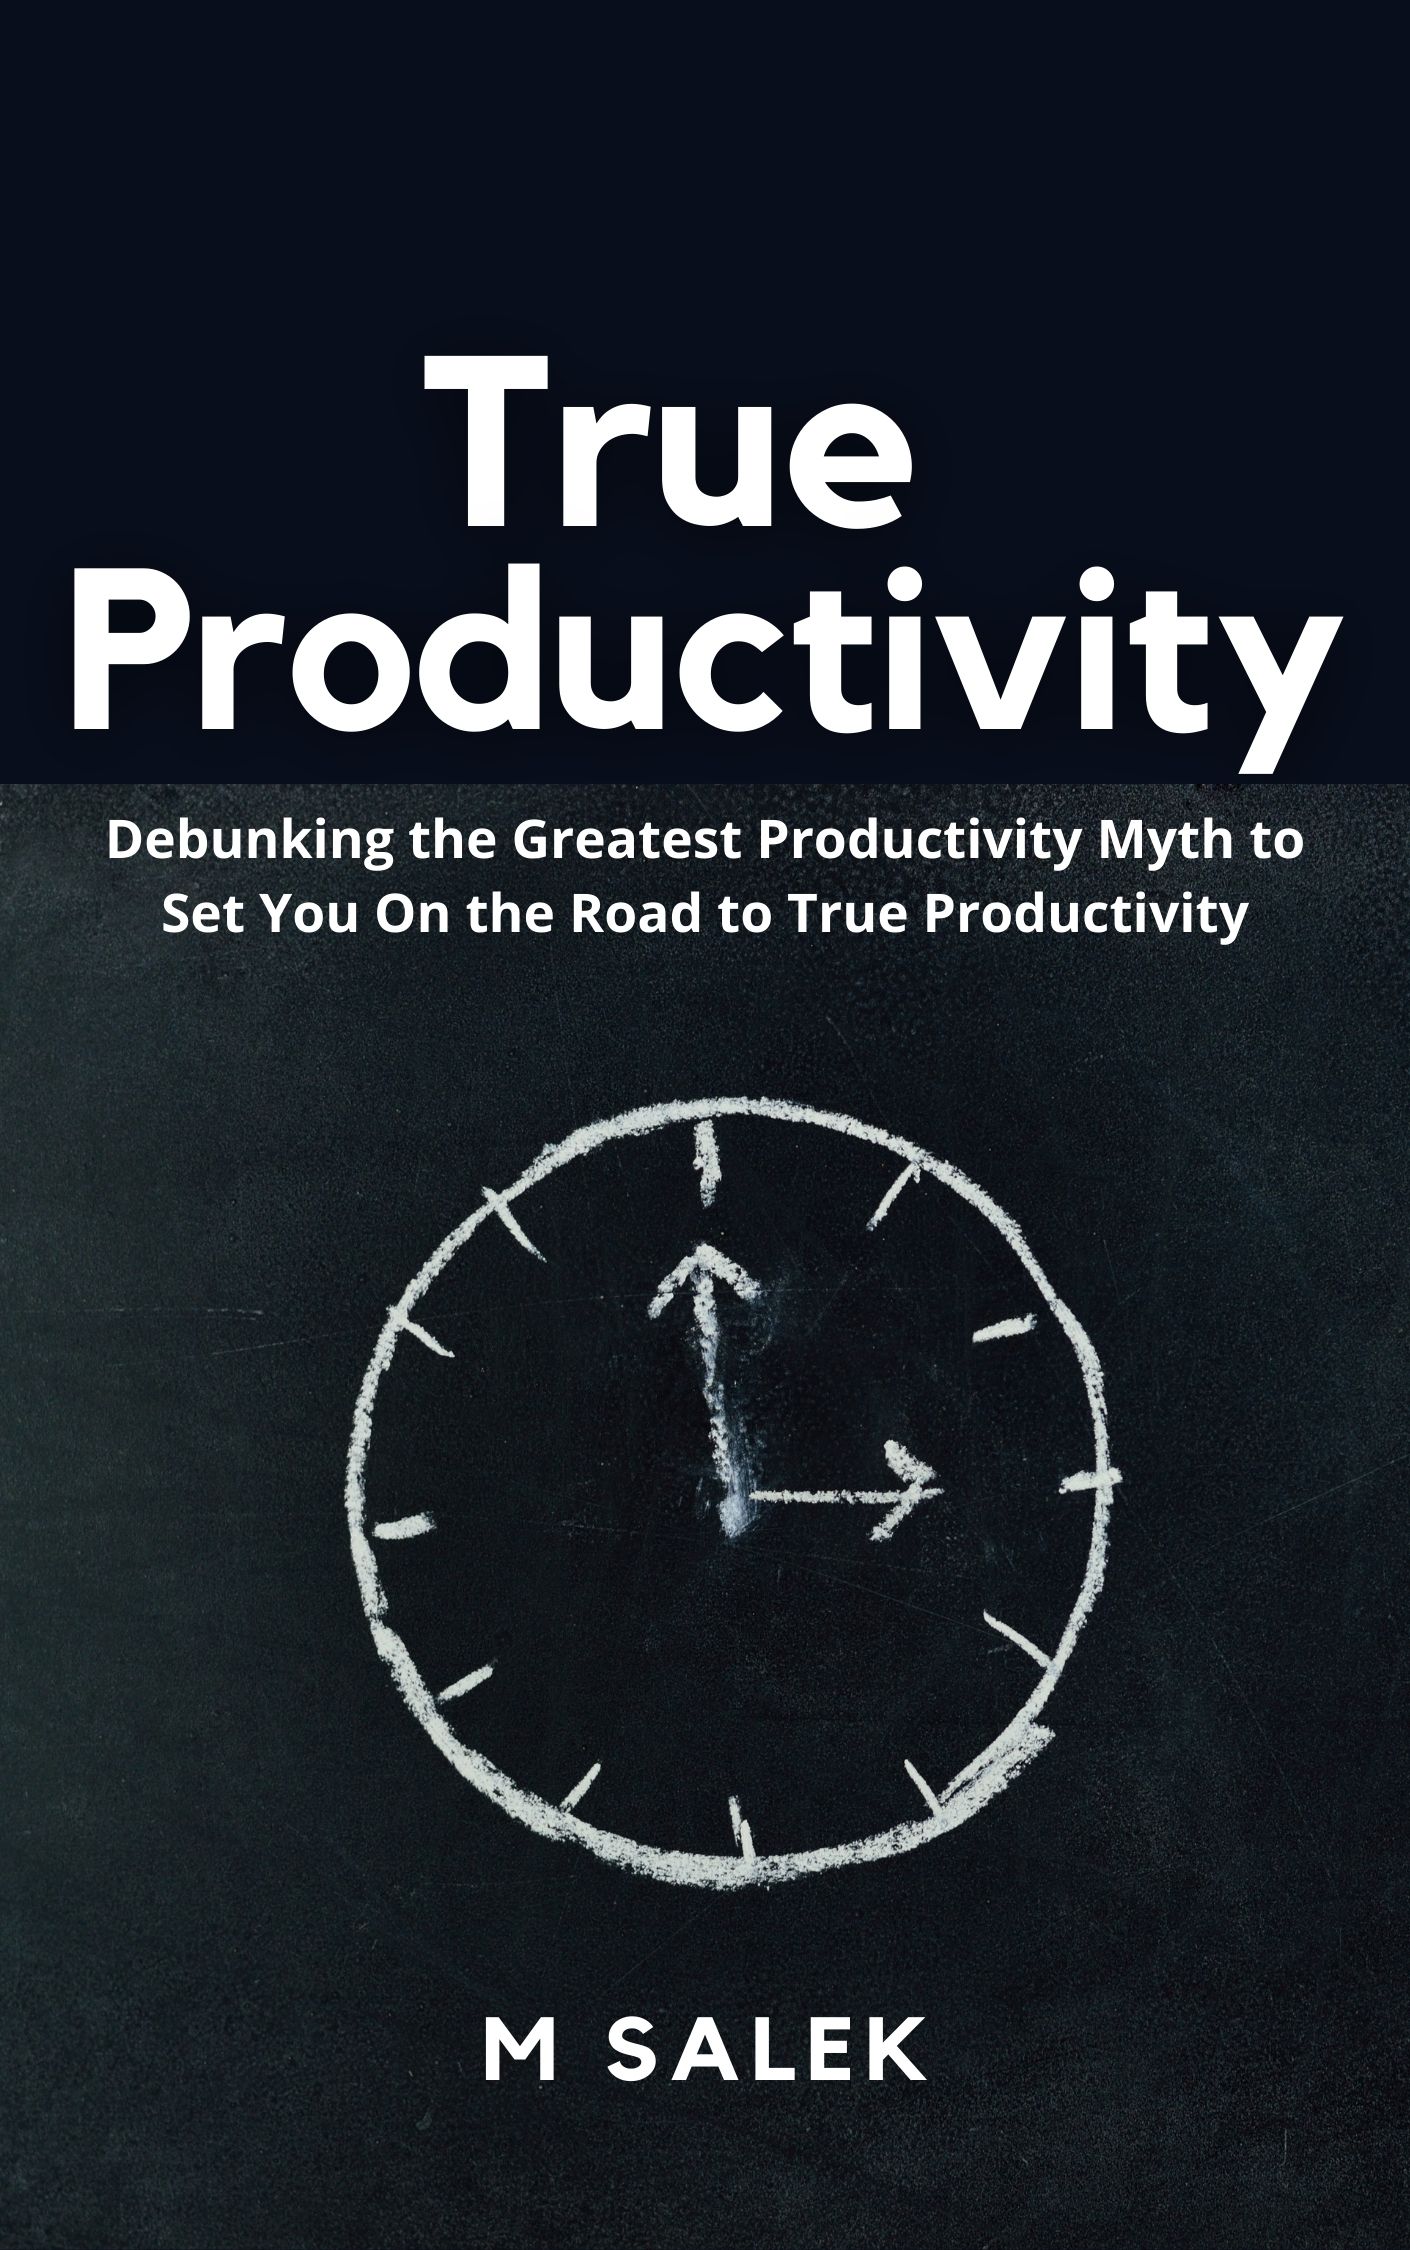 FREE: True Productivity: Debunking the Greatest Productivity Myth to Set You On the Road to True Productivity by M Salek